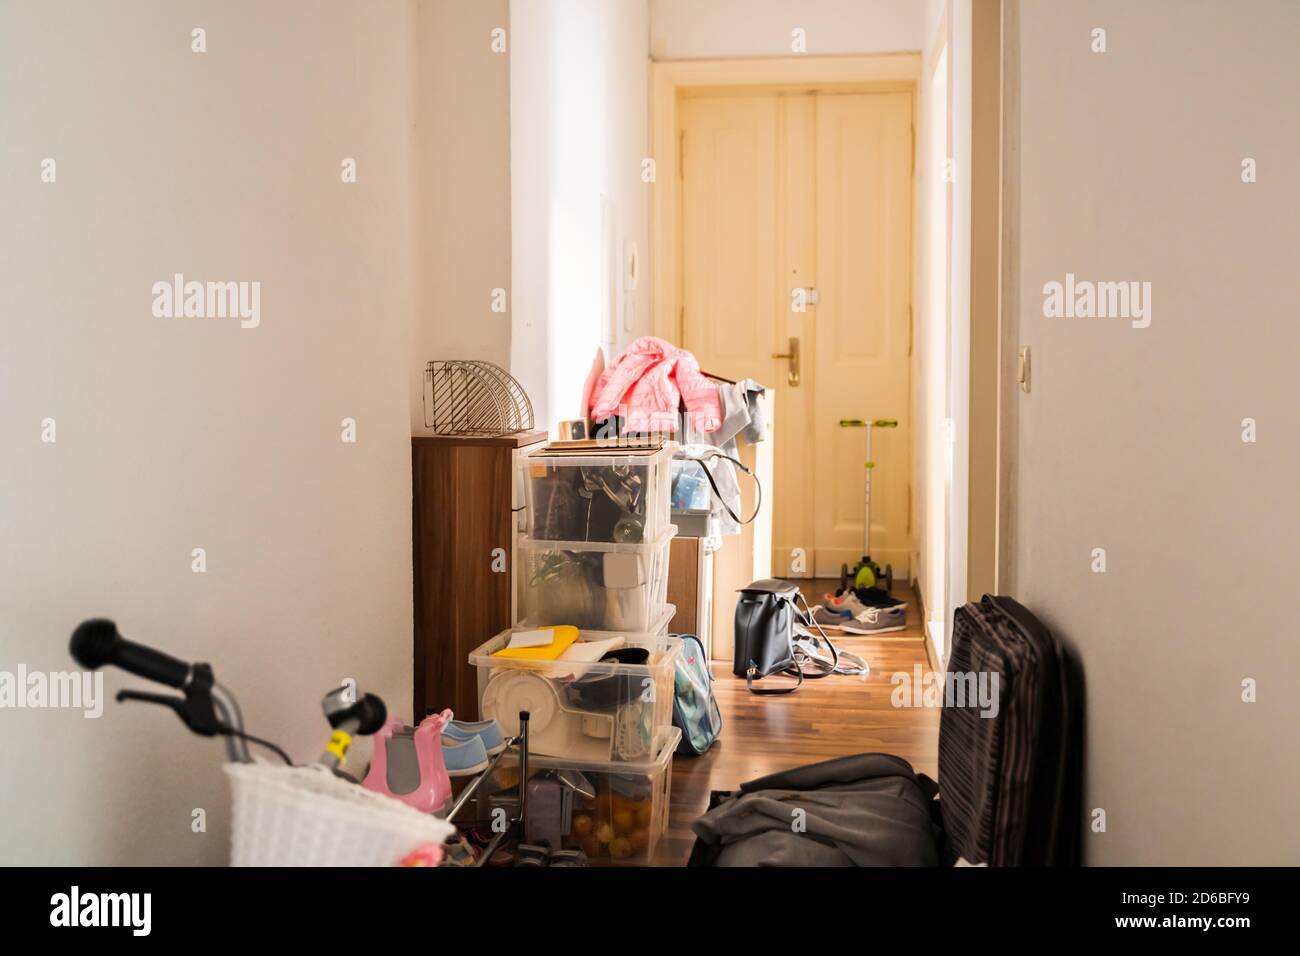 Messy Home Room With Junk And Packed Trash Stock Photo - Alamy